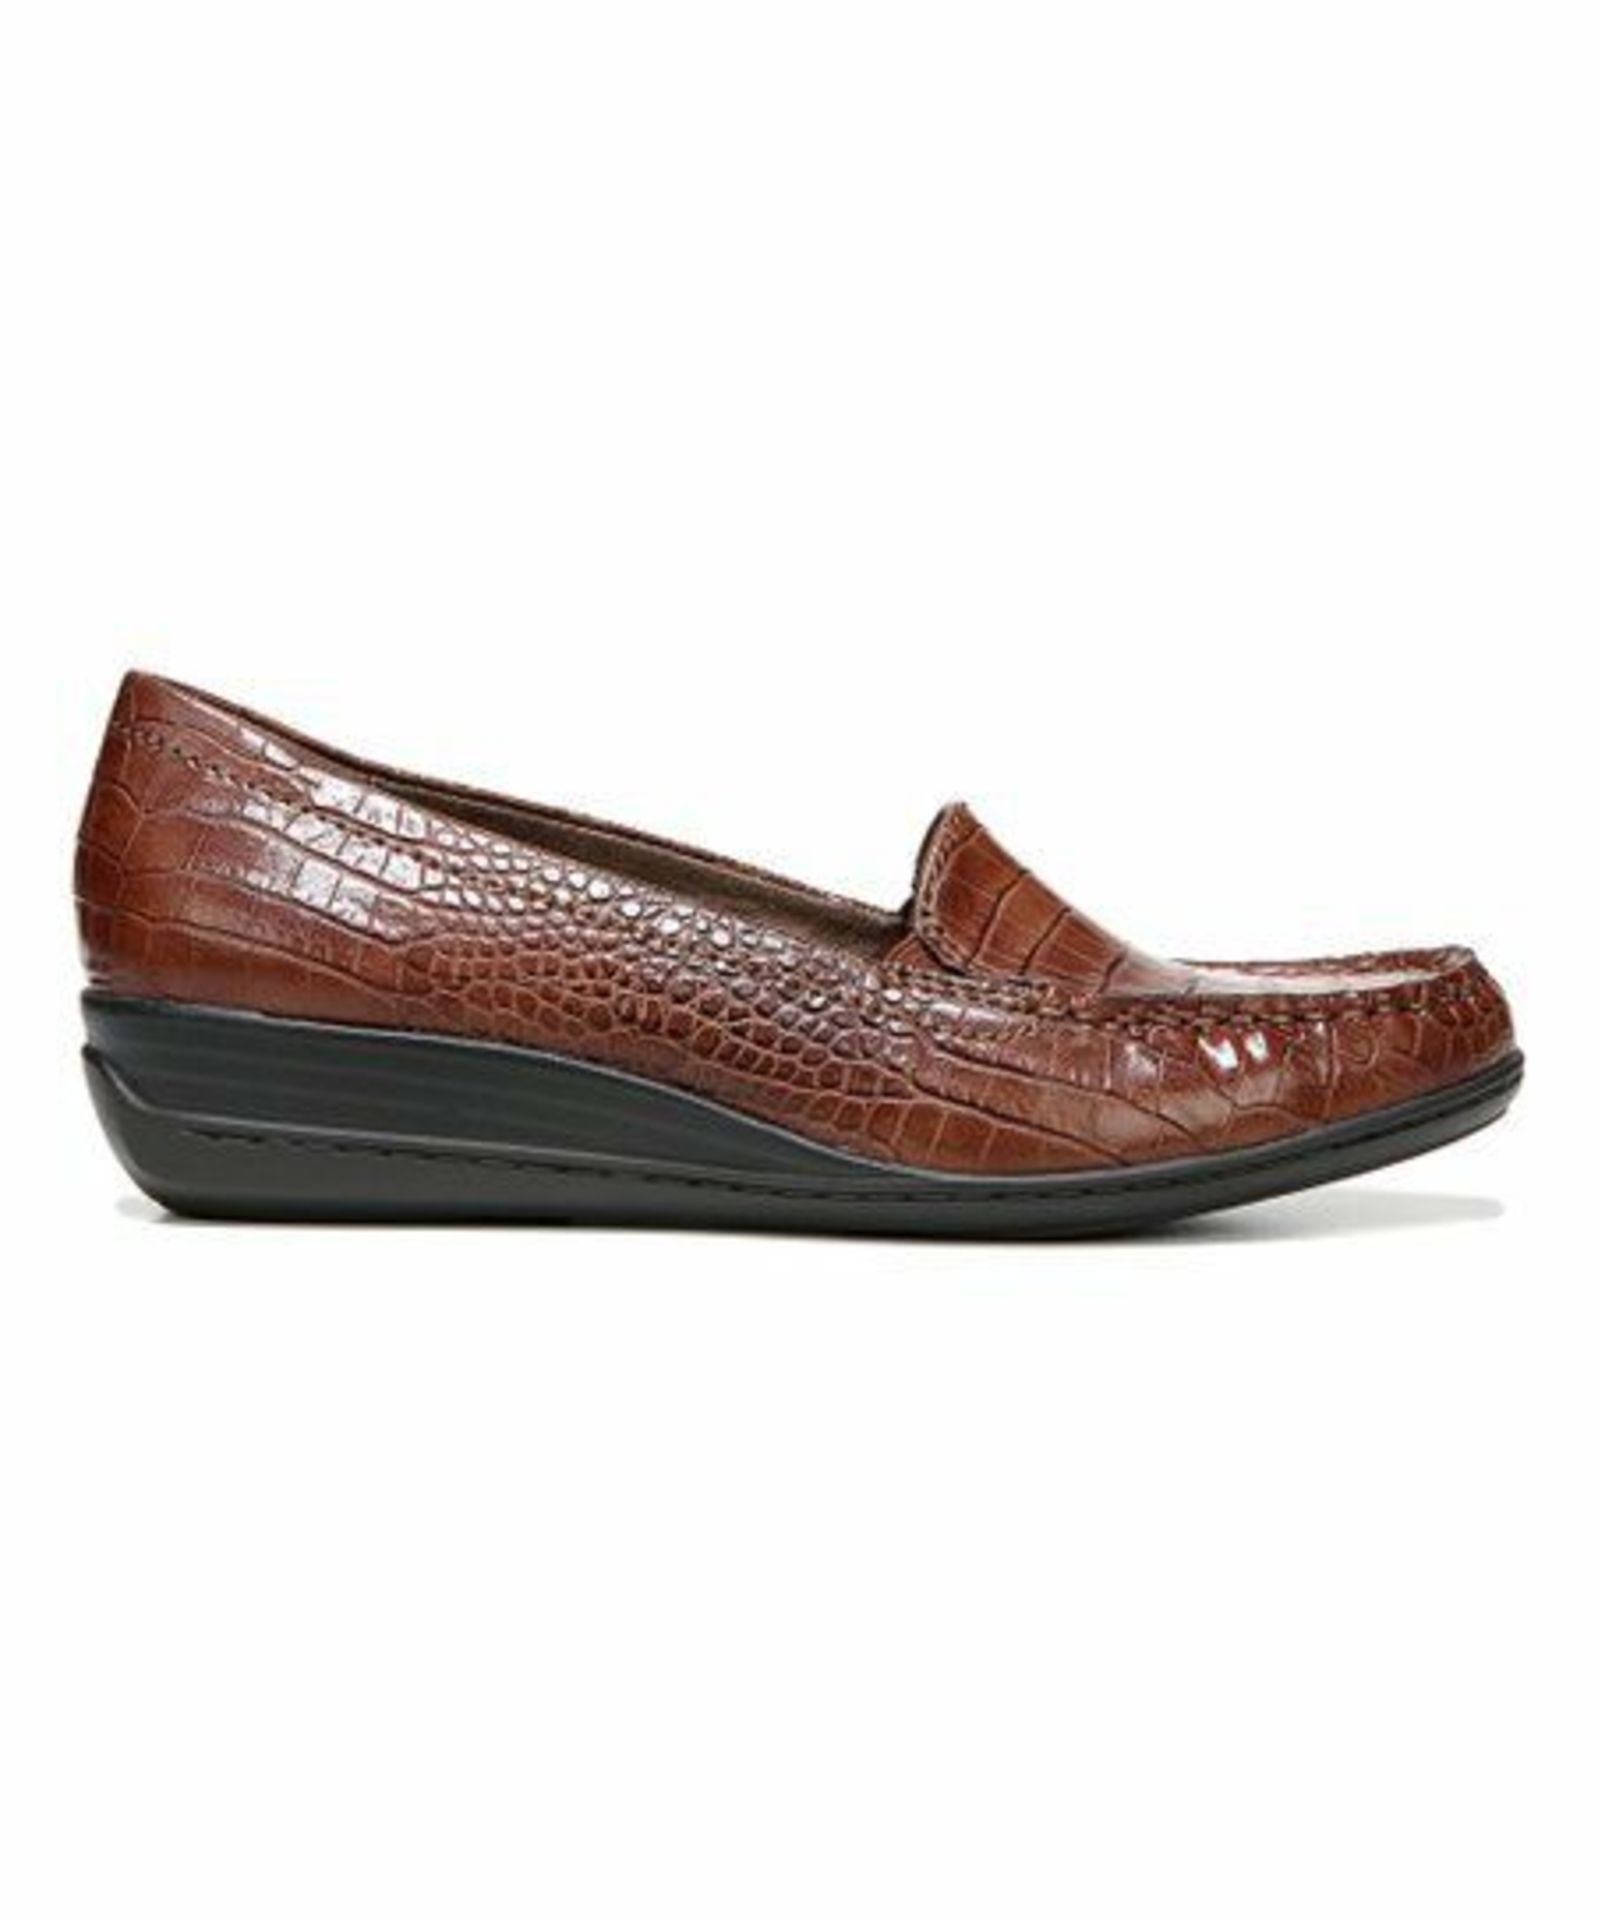 Natural Soul By Naturalizer, Black Wilamina Loafer - Women, Size Uk 3 Eur 35 Us (New With Box) [Ref: - Image 4 of 5